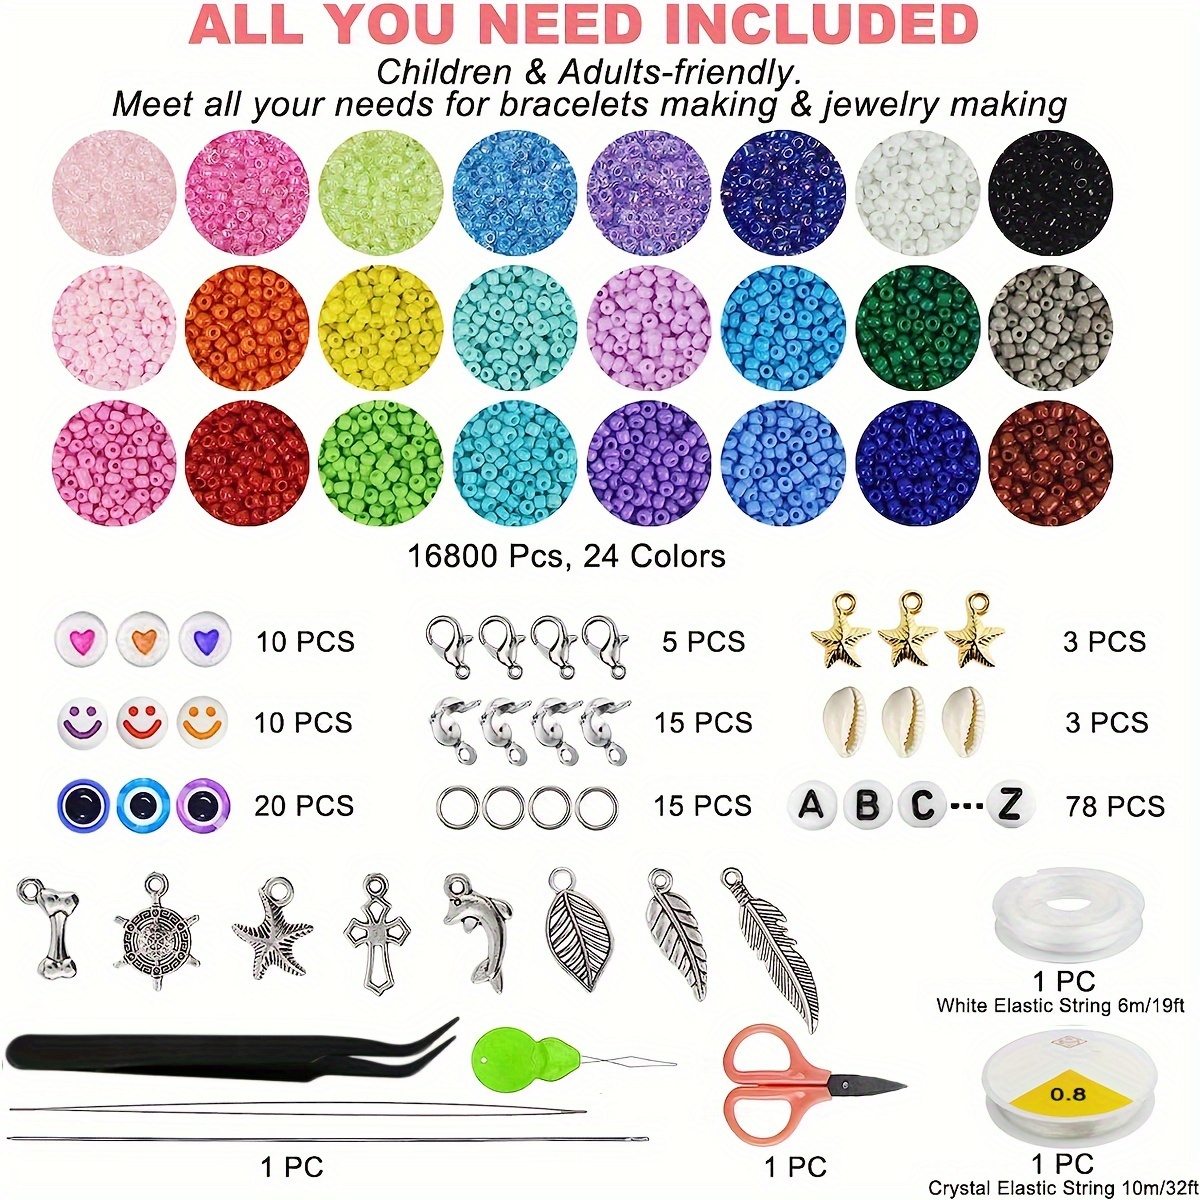 Heasy 4mm Seed Beads, 3500pcs Glass Seed Beads for Jewelry Bracelet Making  Kit, 24 Colors Seed Beads with Pendant Charms Kit, Small Beads Kit for DIY